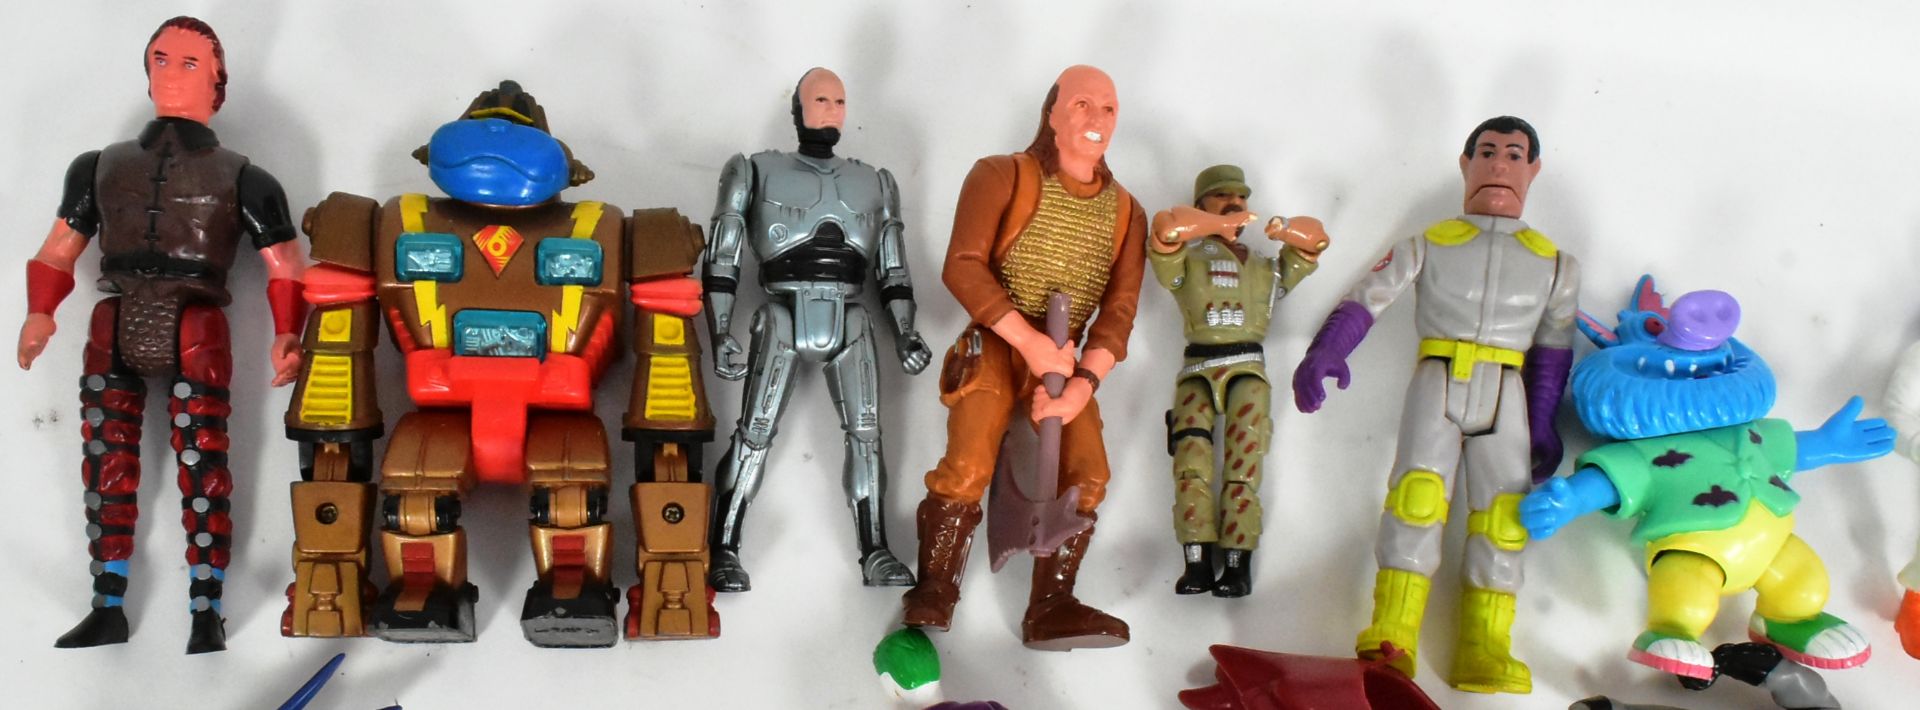 ACTION FIGURES - COLLECTION OF 1980S & 1990S FIGURES - Image 3 of 5